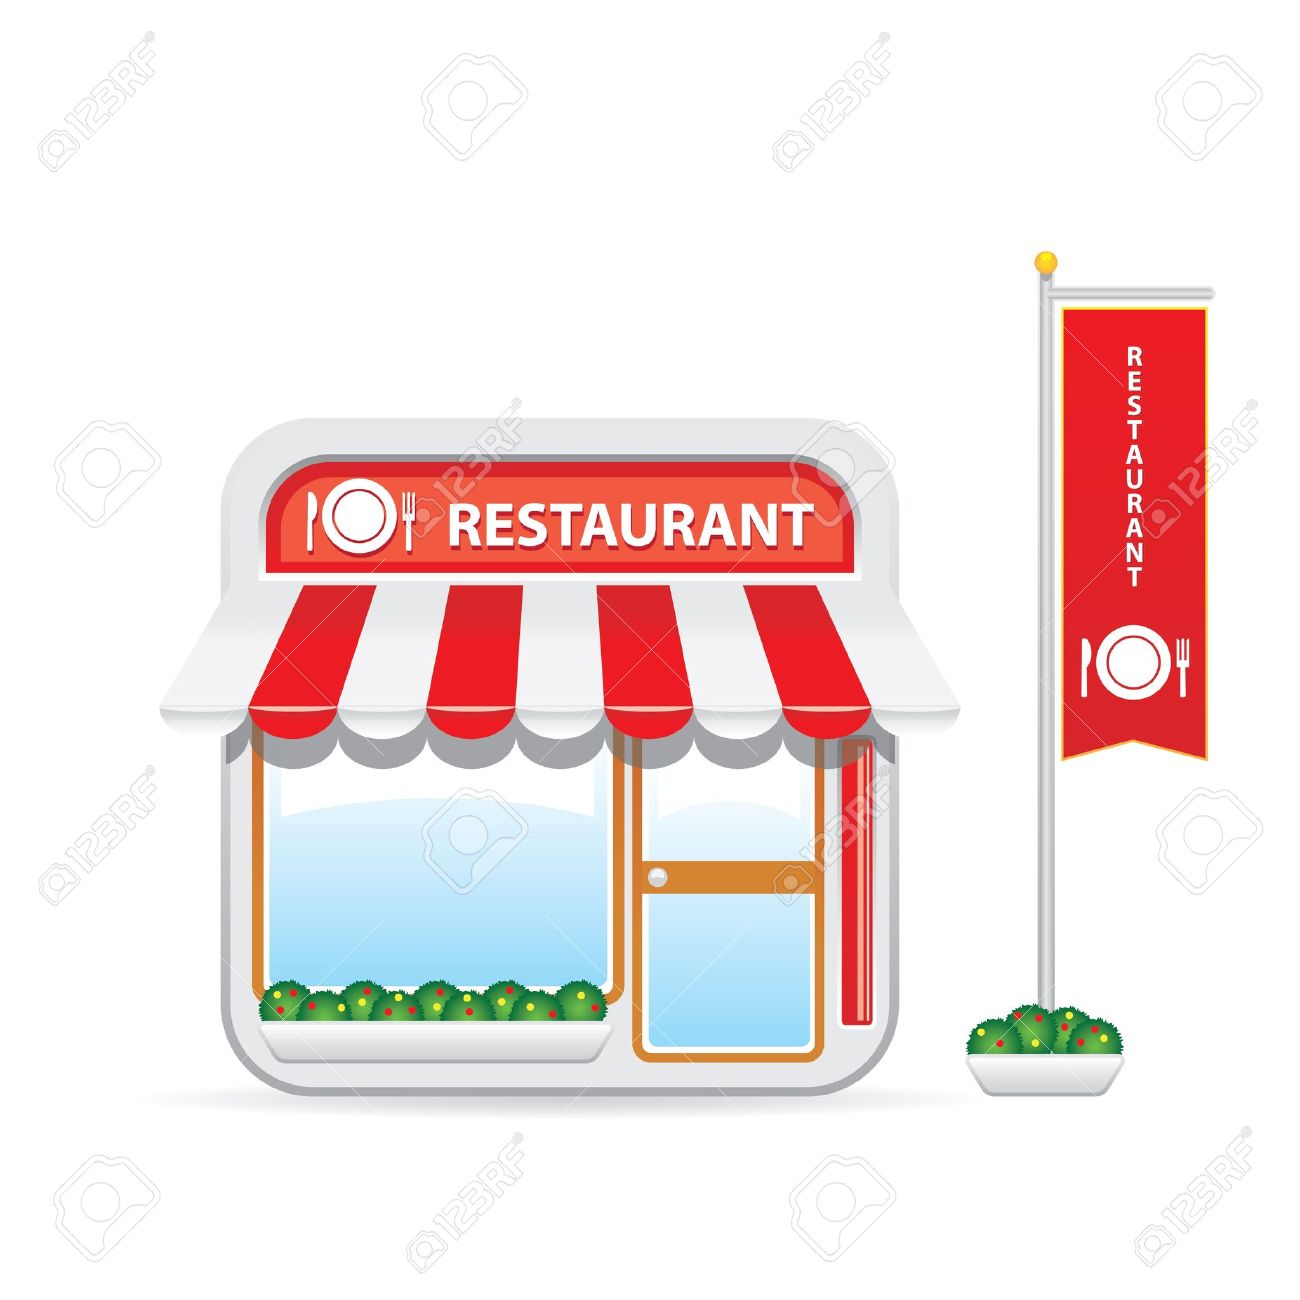 Restaurant - Free buildings icons